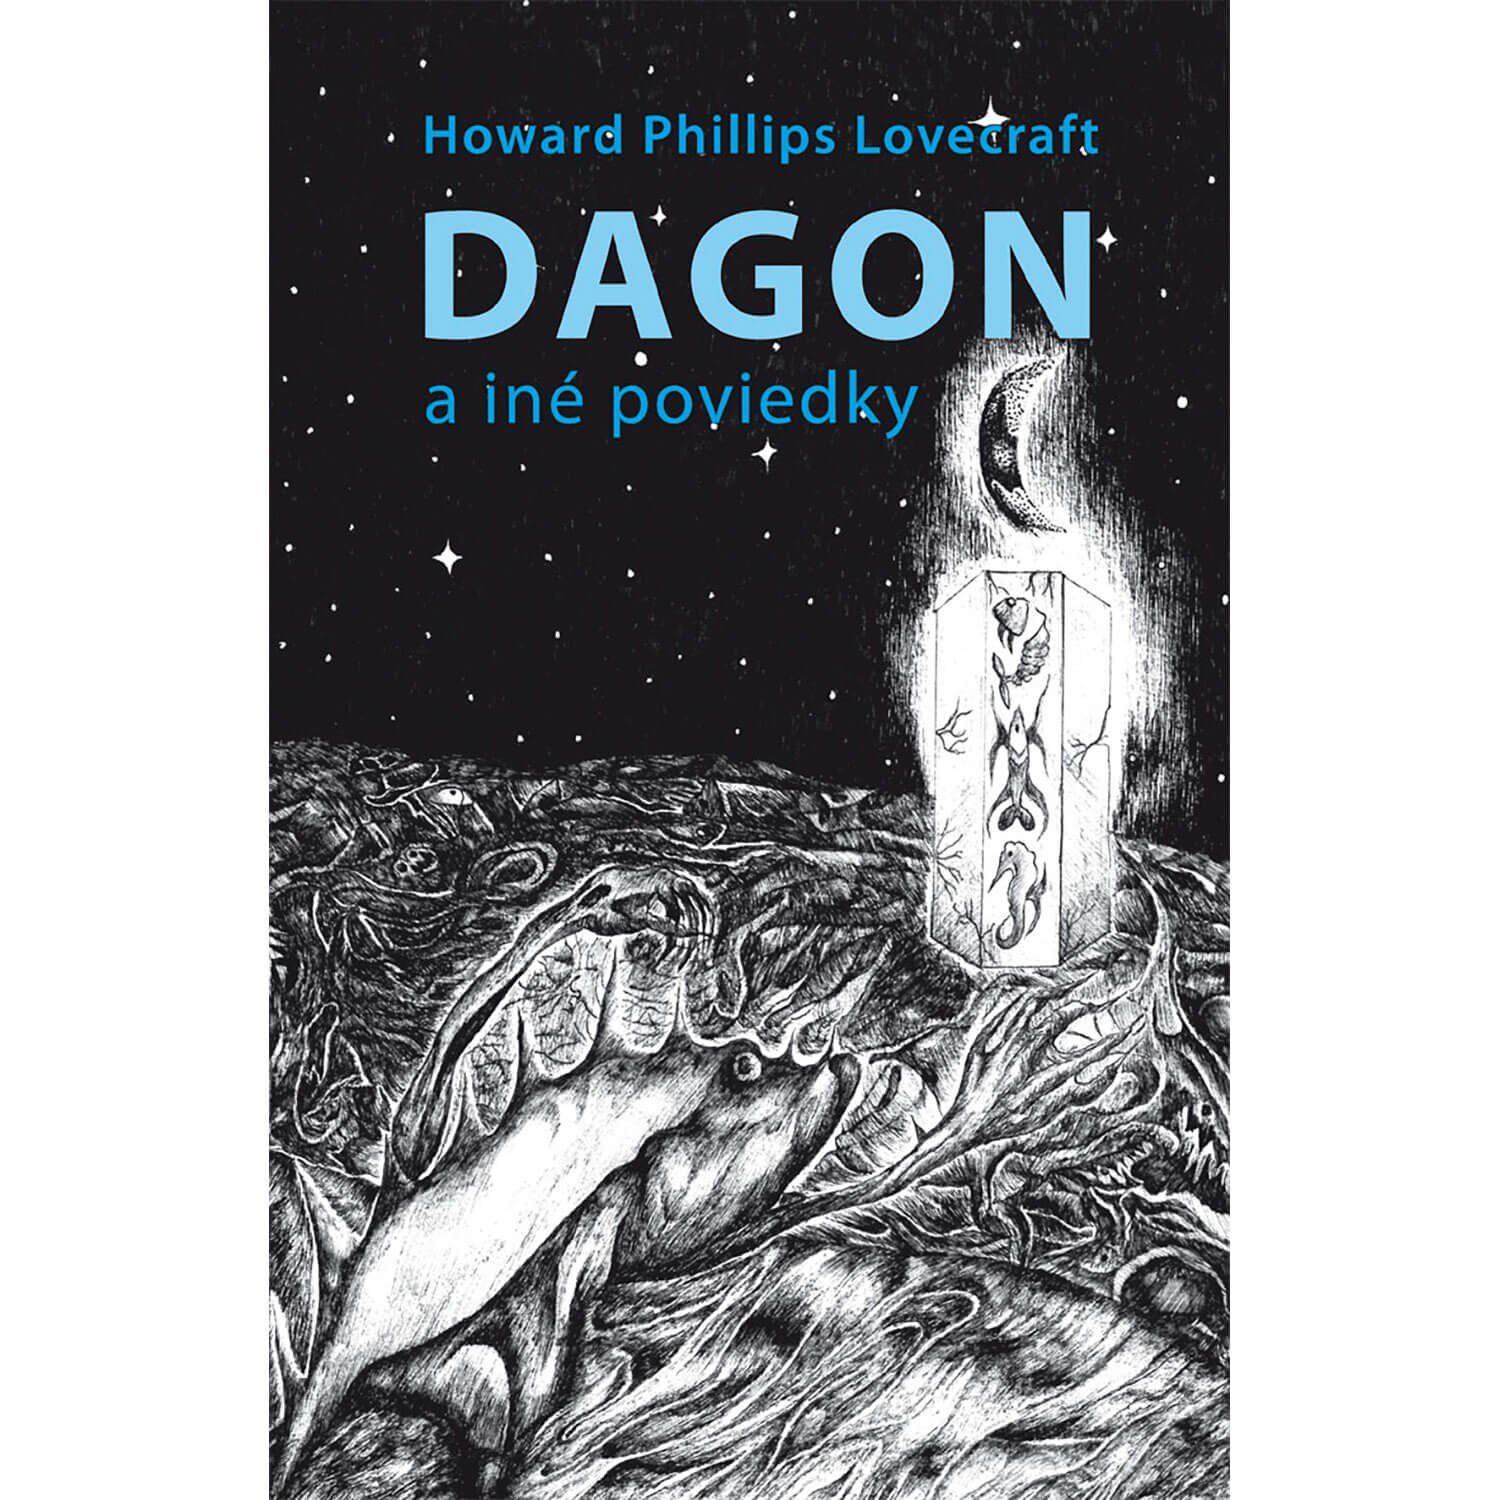 Howard Phillips Lovecraft: Dagon a iné poviedky